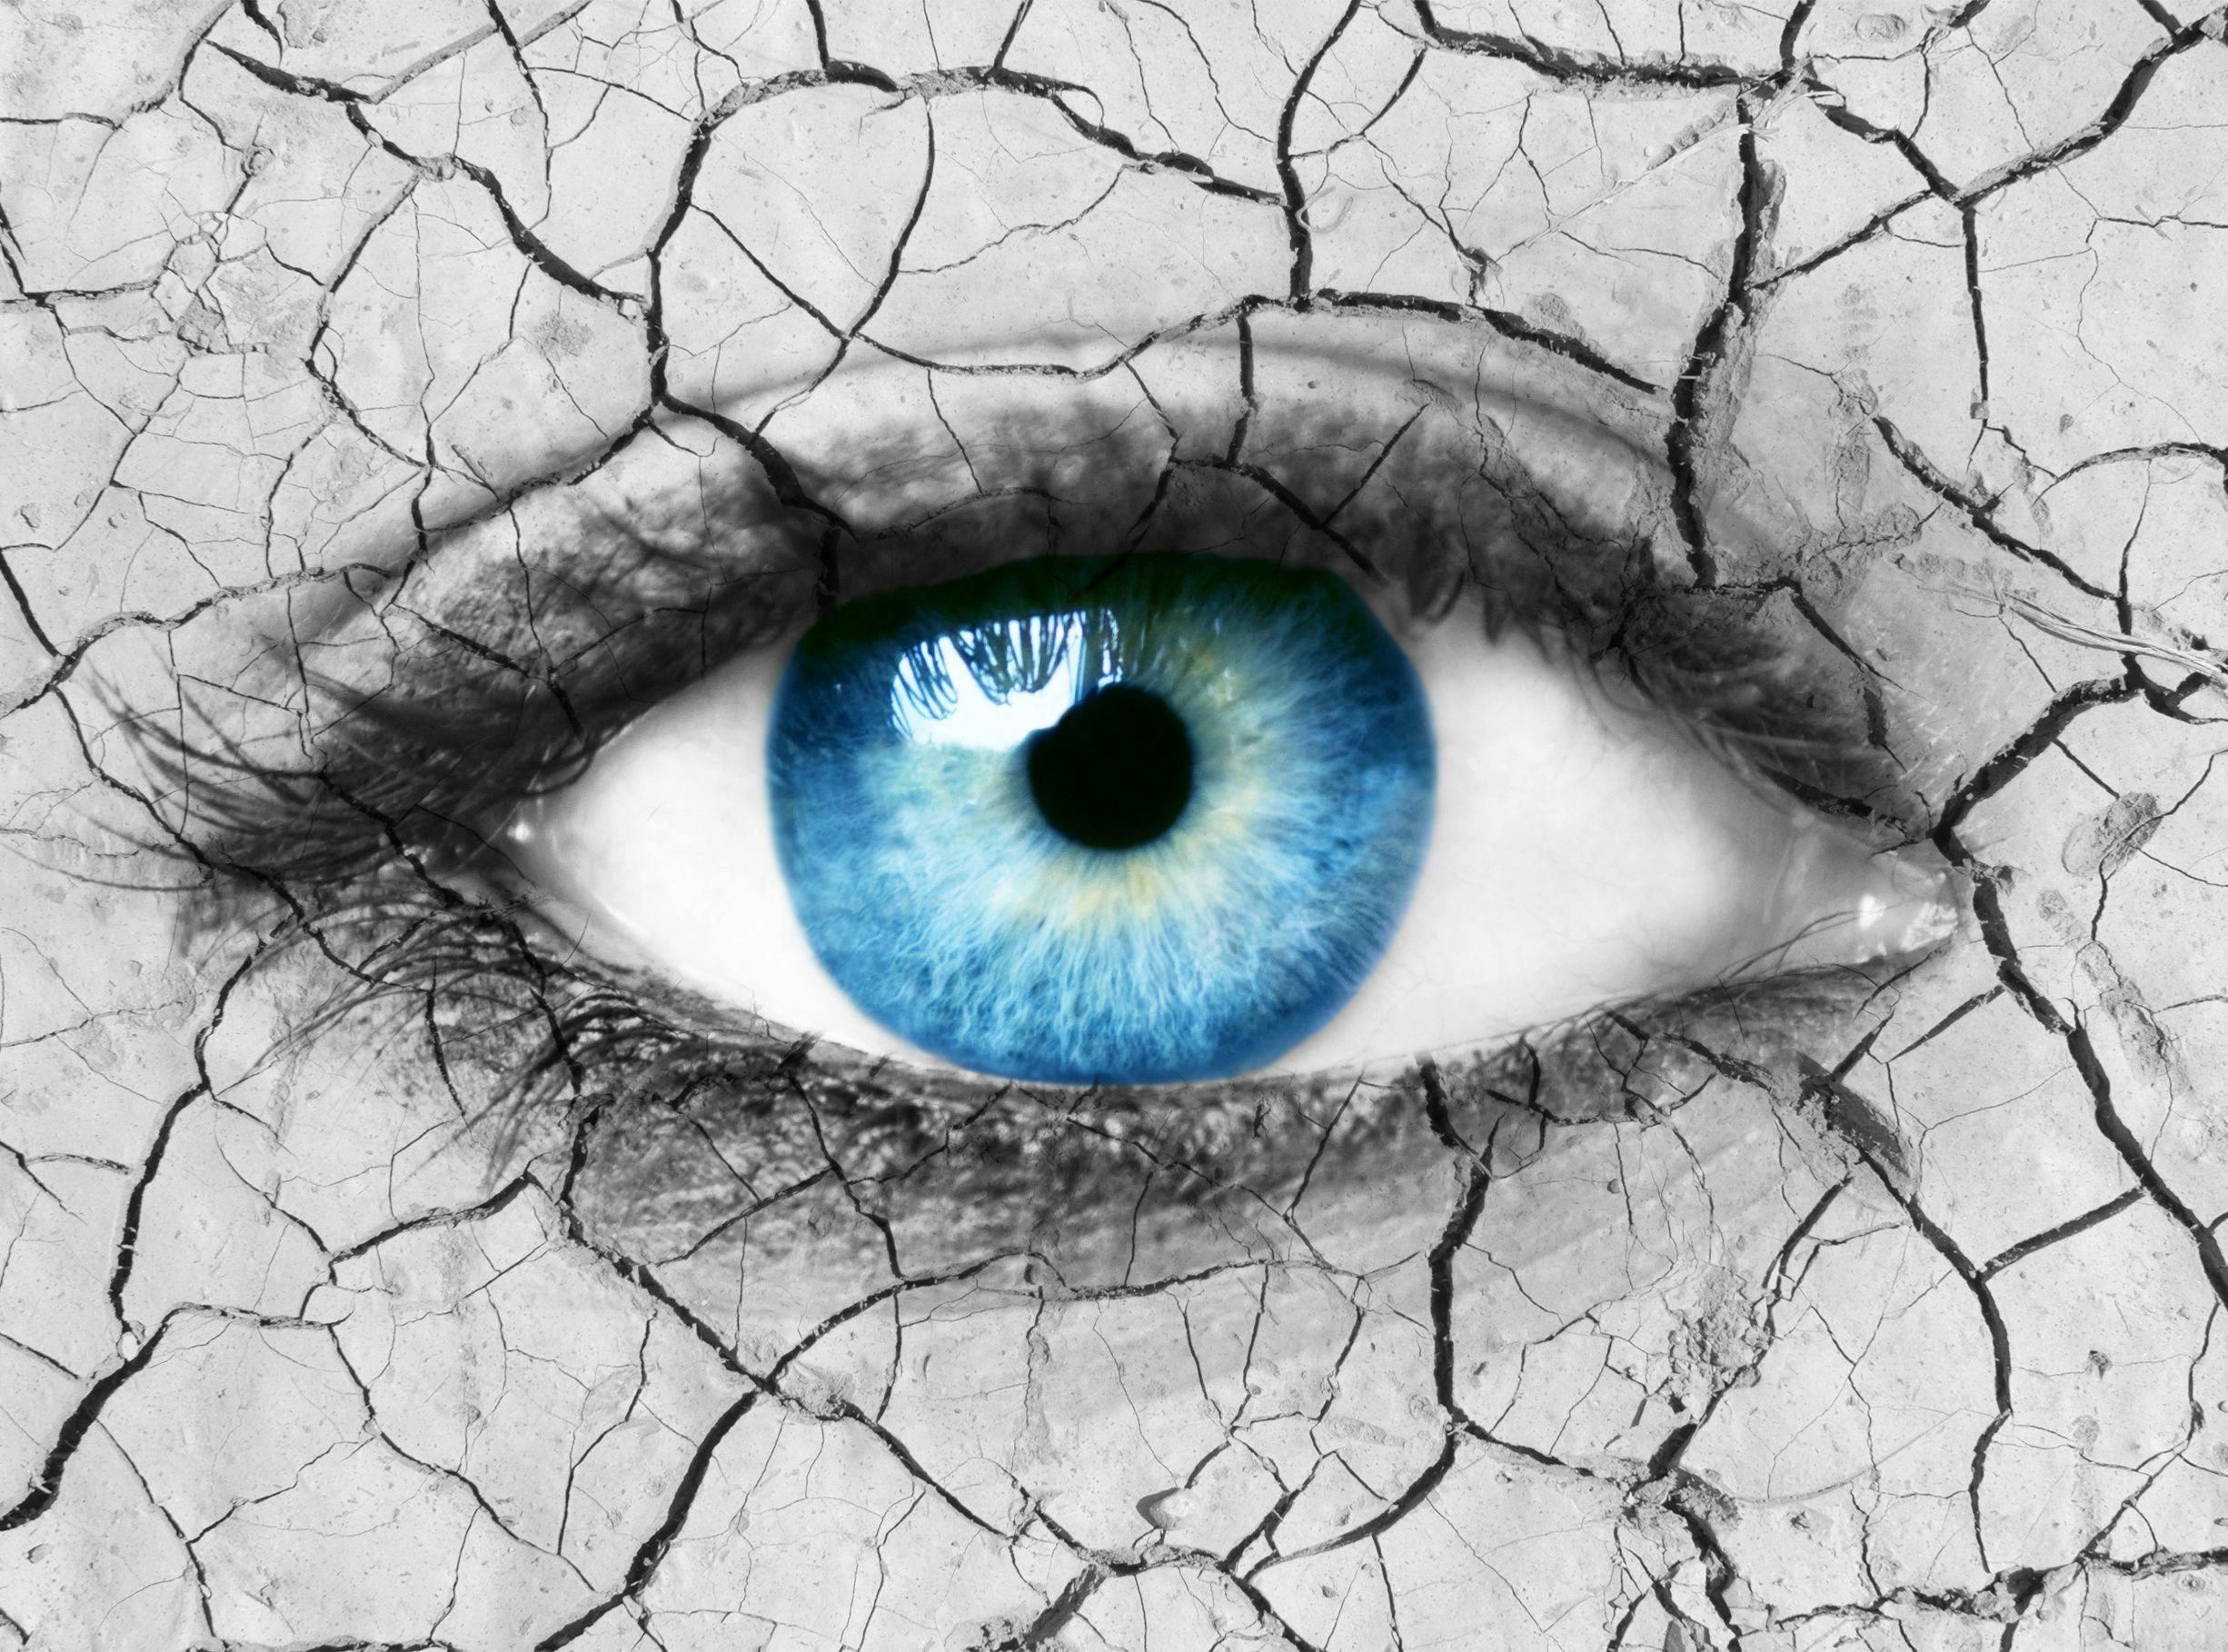 Stem Cell-Derived Eye Drops Improve Outcomes in Dry Eye Disease